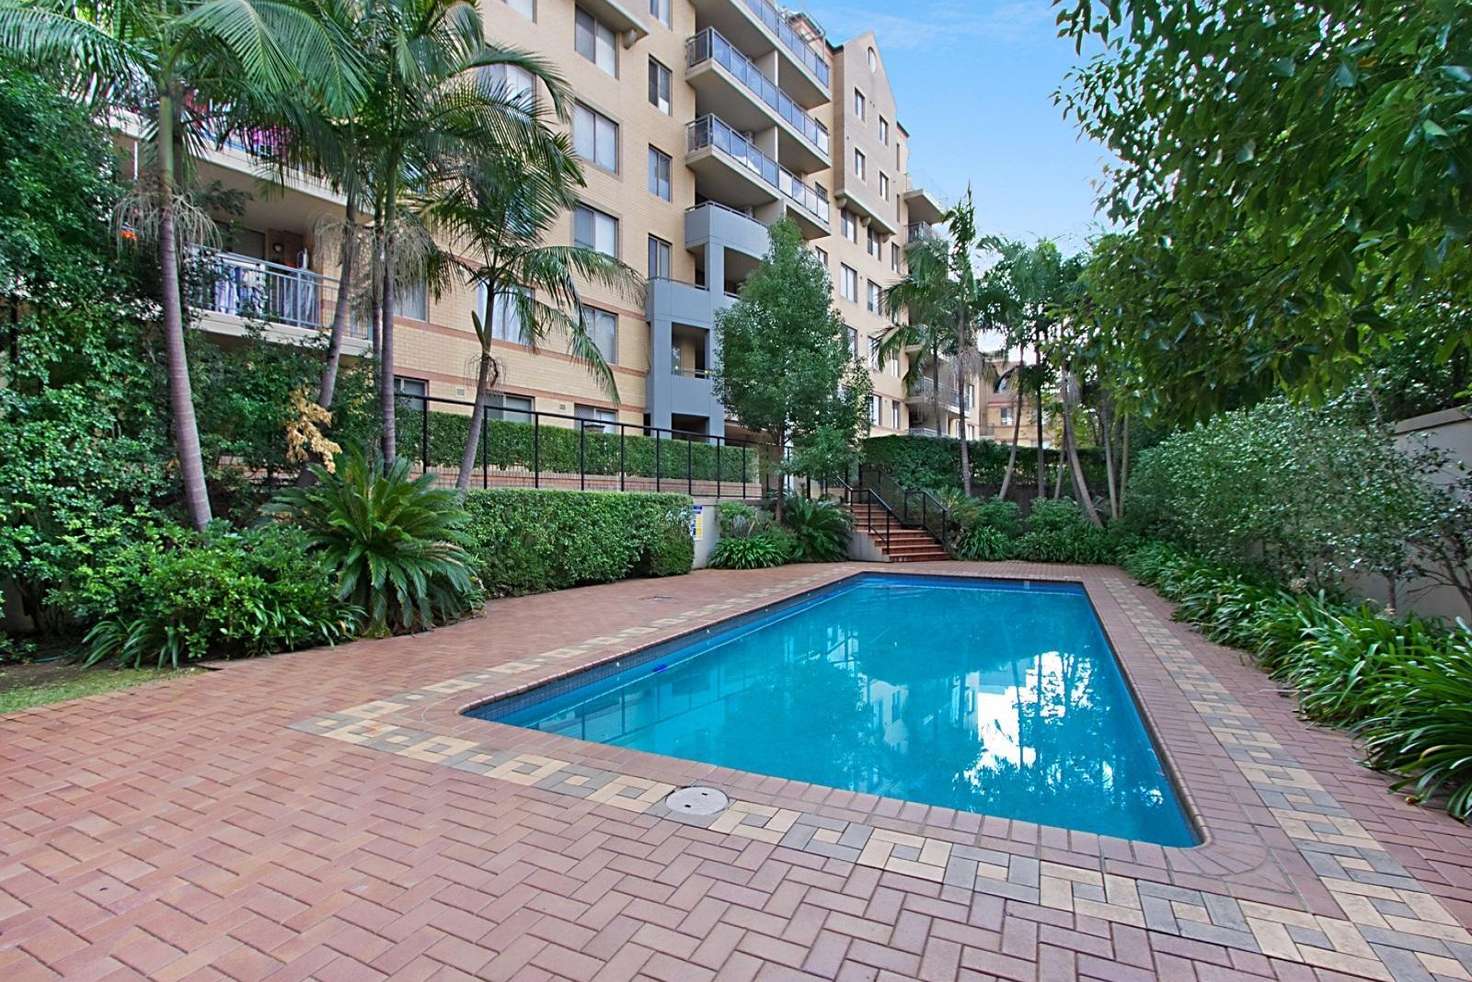 Main view of Homely apartment listing, 73/18 Sorrell Street, Parramatta NSW 2150